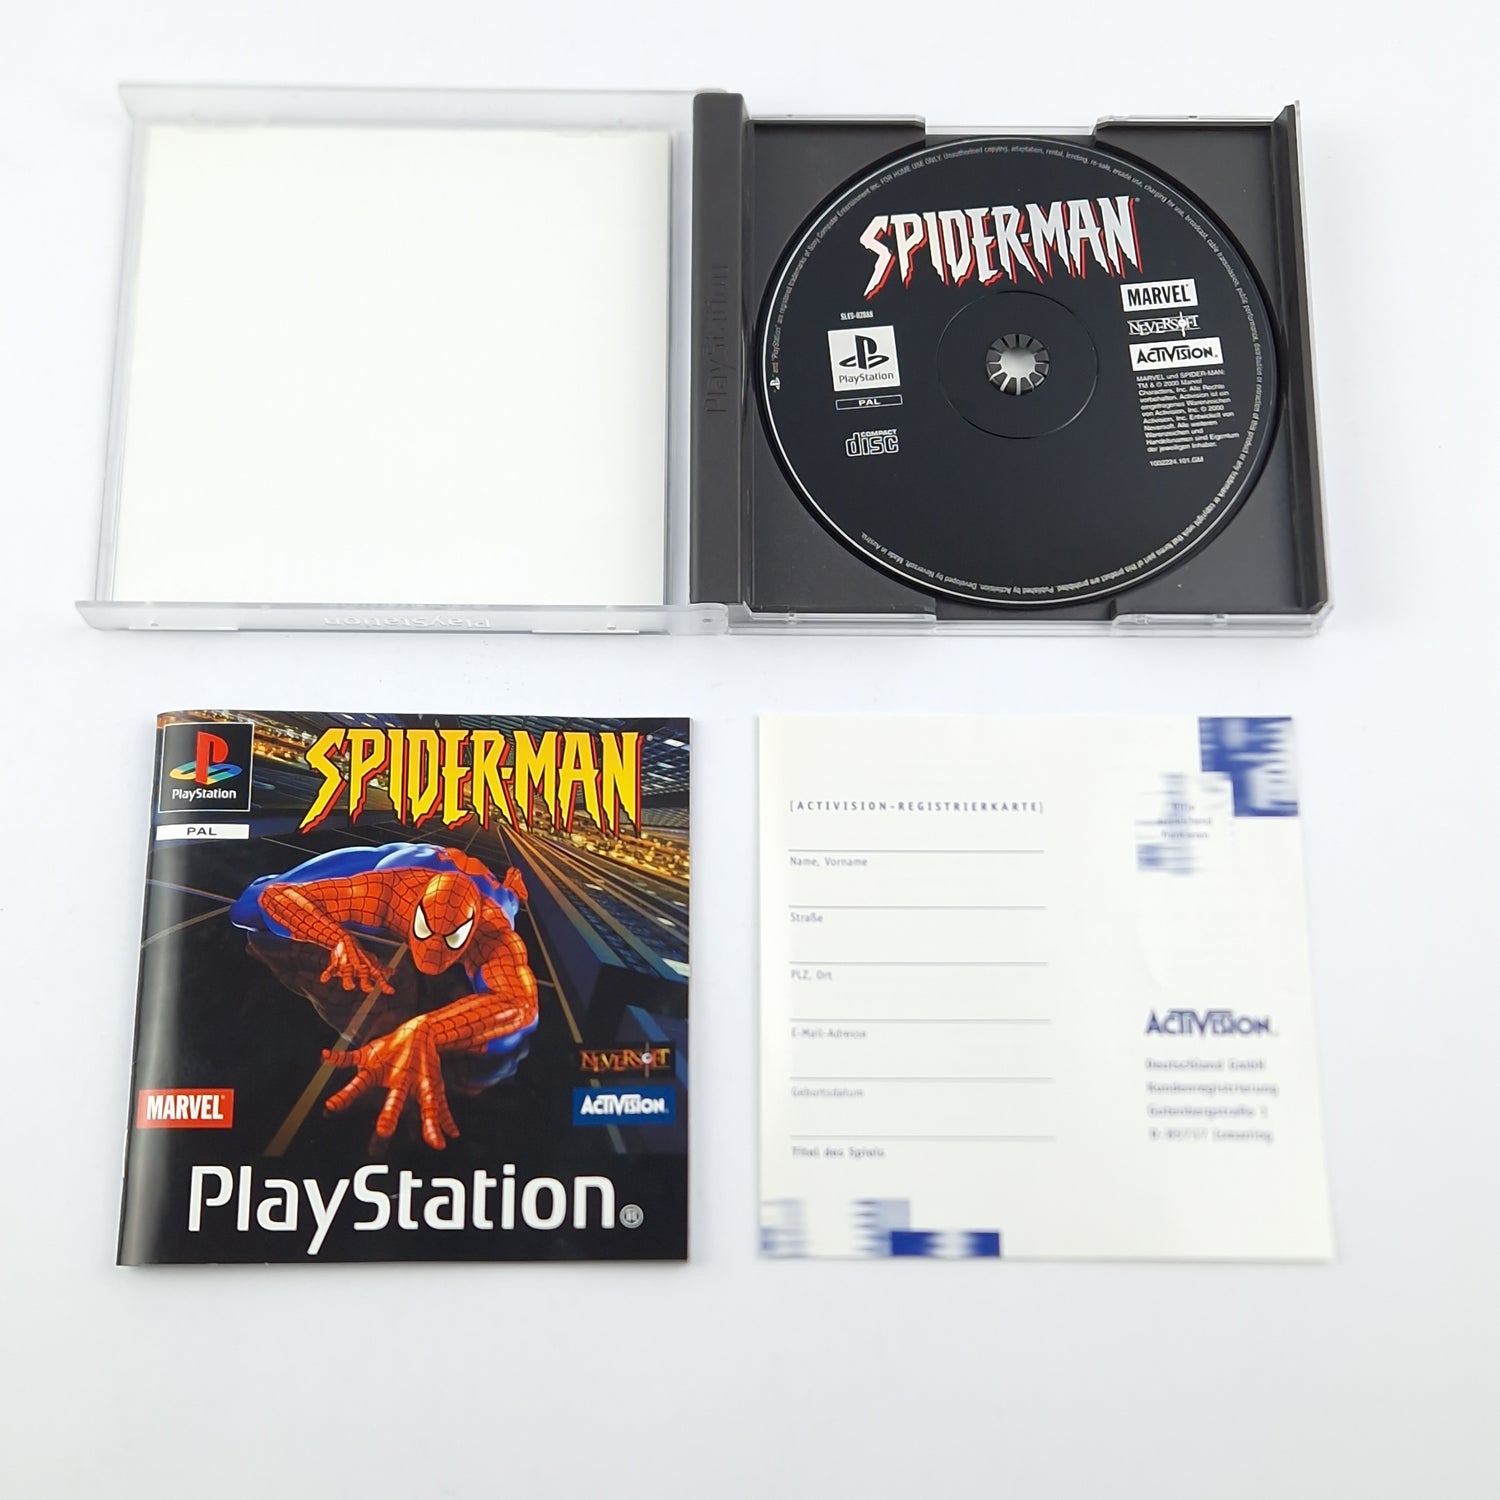 Playstation 1 Spiel : Spider-Man - OVP Anleitung CD / SONY PS1 PSX PAL